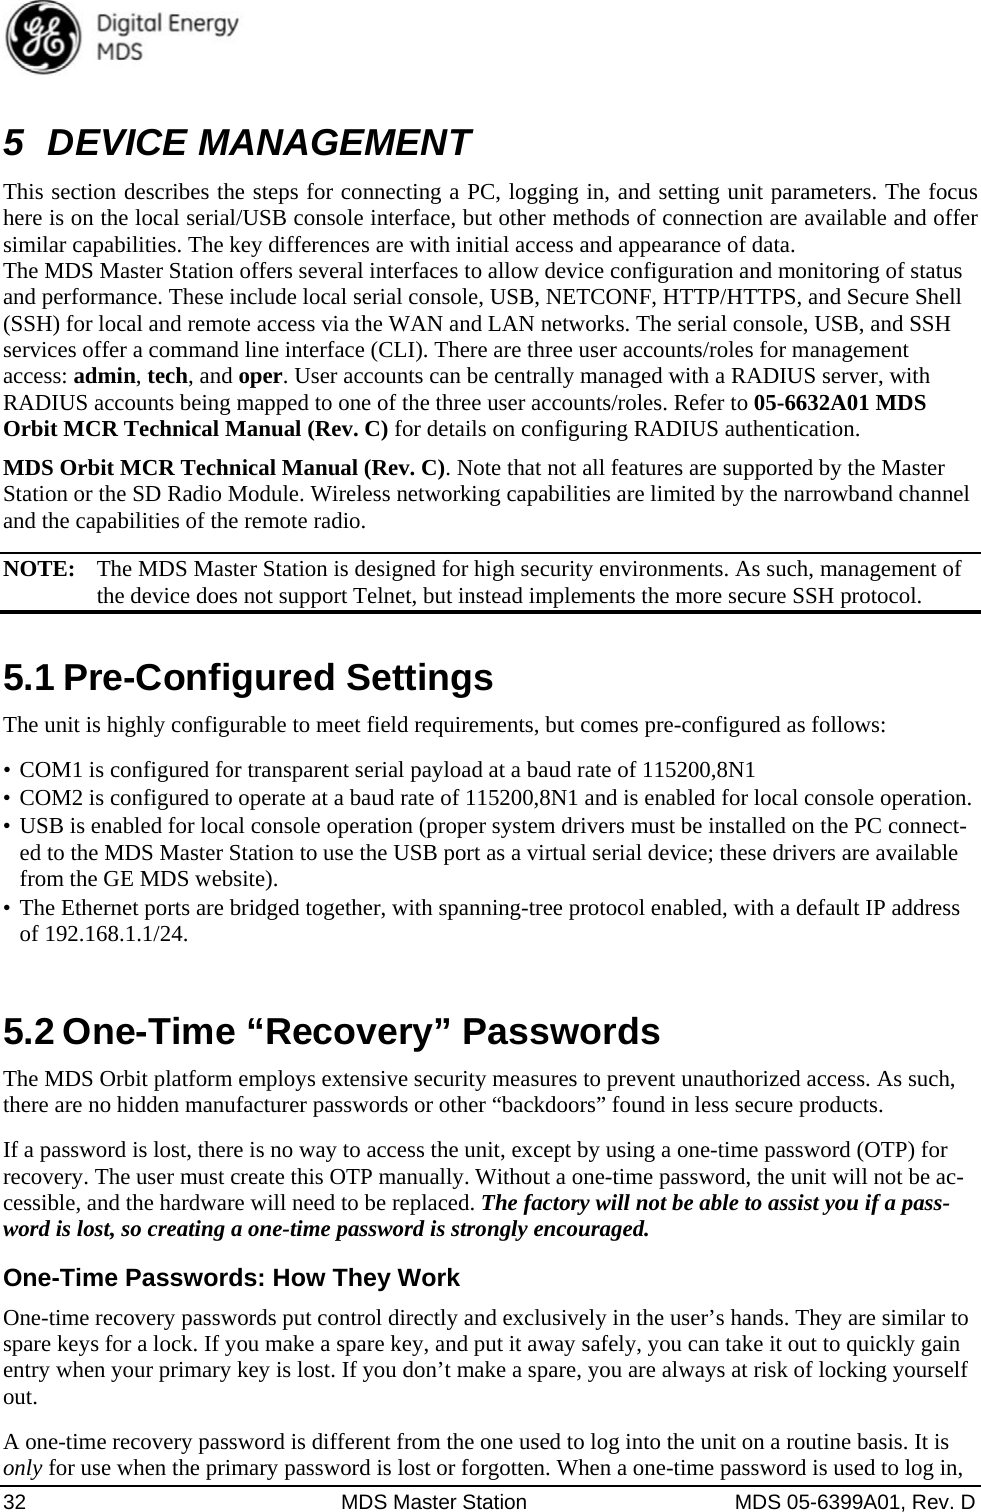  32  MDS Master Station  MDS 05-6399A01, Rev. D 5 DEVICE MANAGEMENT This section describes the steps for connecting a PC, logging in, and setting unit parameters. The focus here is on the local serial/USB console interface, but other methods of connection are available and offer similar capabilities. The key differences are with initial access and appearance of data. The MDS Master Station offers several interfaces to allow device configuration and monitoring of status and performance. These include local serial console, USB, NETCONF, HTTP/HTTPS, and Secure Shell (SSH) for local and remote access via the WAN and LAN networks. The serial console, USB, and SSH services offer a command line interface (CLI). There are three user accounts/roles for management access: admin, tech, and oper. User accounts can be centrally managed with a RADIUS server, with RADIUS accounts being mapped to one of the three user accounts/roles. Refer to 05-6632A01 MDS Orbit MCR Technical Manual (Rev. C) for details on configuring RADIUS authentication. MDS Orbit MCR Technical Manual (Rev. C). Note that not all features are supported by the Master Station or the SD Radio Module. Wireless networking capabilities are limited by the narrowband channel and the capabilities of the remote radio. NOTE:  The MDS Master Station is designed for high security environments. As such, management of the device does not support Telnet, but instead implements the more secure SSH protocol. 5.1 Pre-Configured Settings The unit is highly configurable to meet field requirements, but comes pre-configured as follows: •  COM1 is configured for transparent serial payload at a baud rate of 115200,8N1 •  COM2 is configured to operate at a baud rate of 115200,8N1 and is enabled for local console operation. •  USB is enabled for local console operation (proper system drivers must be installed on the PC connect-ed to the MDS Master Station to use the USB port as a virtual serial device; these drivers are available from the GE MDS website).   •  The Ethernet ports are bridged together, with spanning-tree protocol enabled, with a default IP address of 192.168.1.1/24. 5.2 One-Time “Recovery” Passwords  The MDS Orbit platform employs extensive security measures to prevent unauthorized access. As such, there are no hidden manufacturer passwords or other “backdoors” found in less secure products. If a password is lost, there is no way to access the unit, except by using a one-time password (OTP) for recovery. The user must create this OTP manually. Without a one-time password, the unit will not be ac-cessible, and the hardware will need to be replaced. The factory will not be able to assist you if a pass-word is lost, so creating a one-time password is strongly encouraged. One-Time Passwords: How They Work One-time recovery passwords put control directly and exclusively in the user’s hands. They are similar to spare keys for a lock. If you make a spare key, and put it away safely, you can take it out to quickly gain entry when your primary key is lost. If you don’t make a spare, you are always at risk of locking yourself out. A one-time recovery password is different from the one used to log into the unit on a routine basis. It is only for use when the primary password is lost or forgotten. When a one-time password is used to log in, 